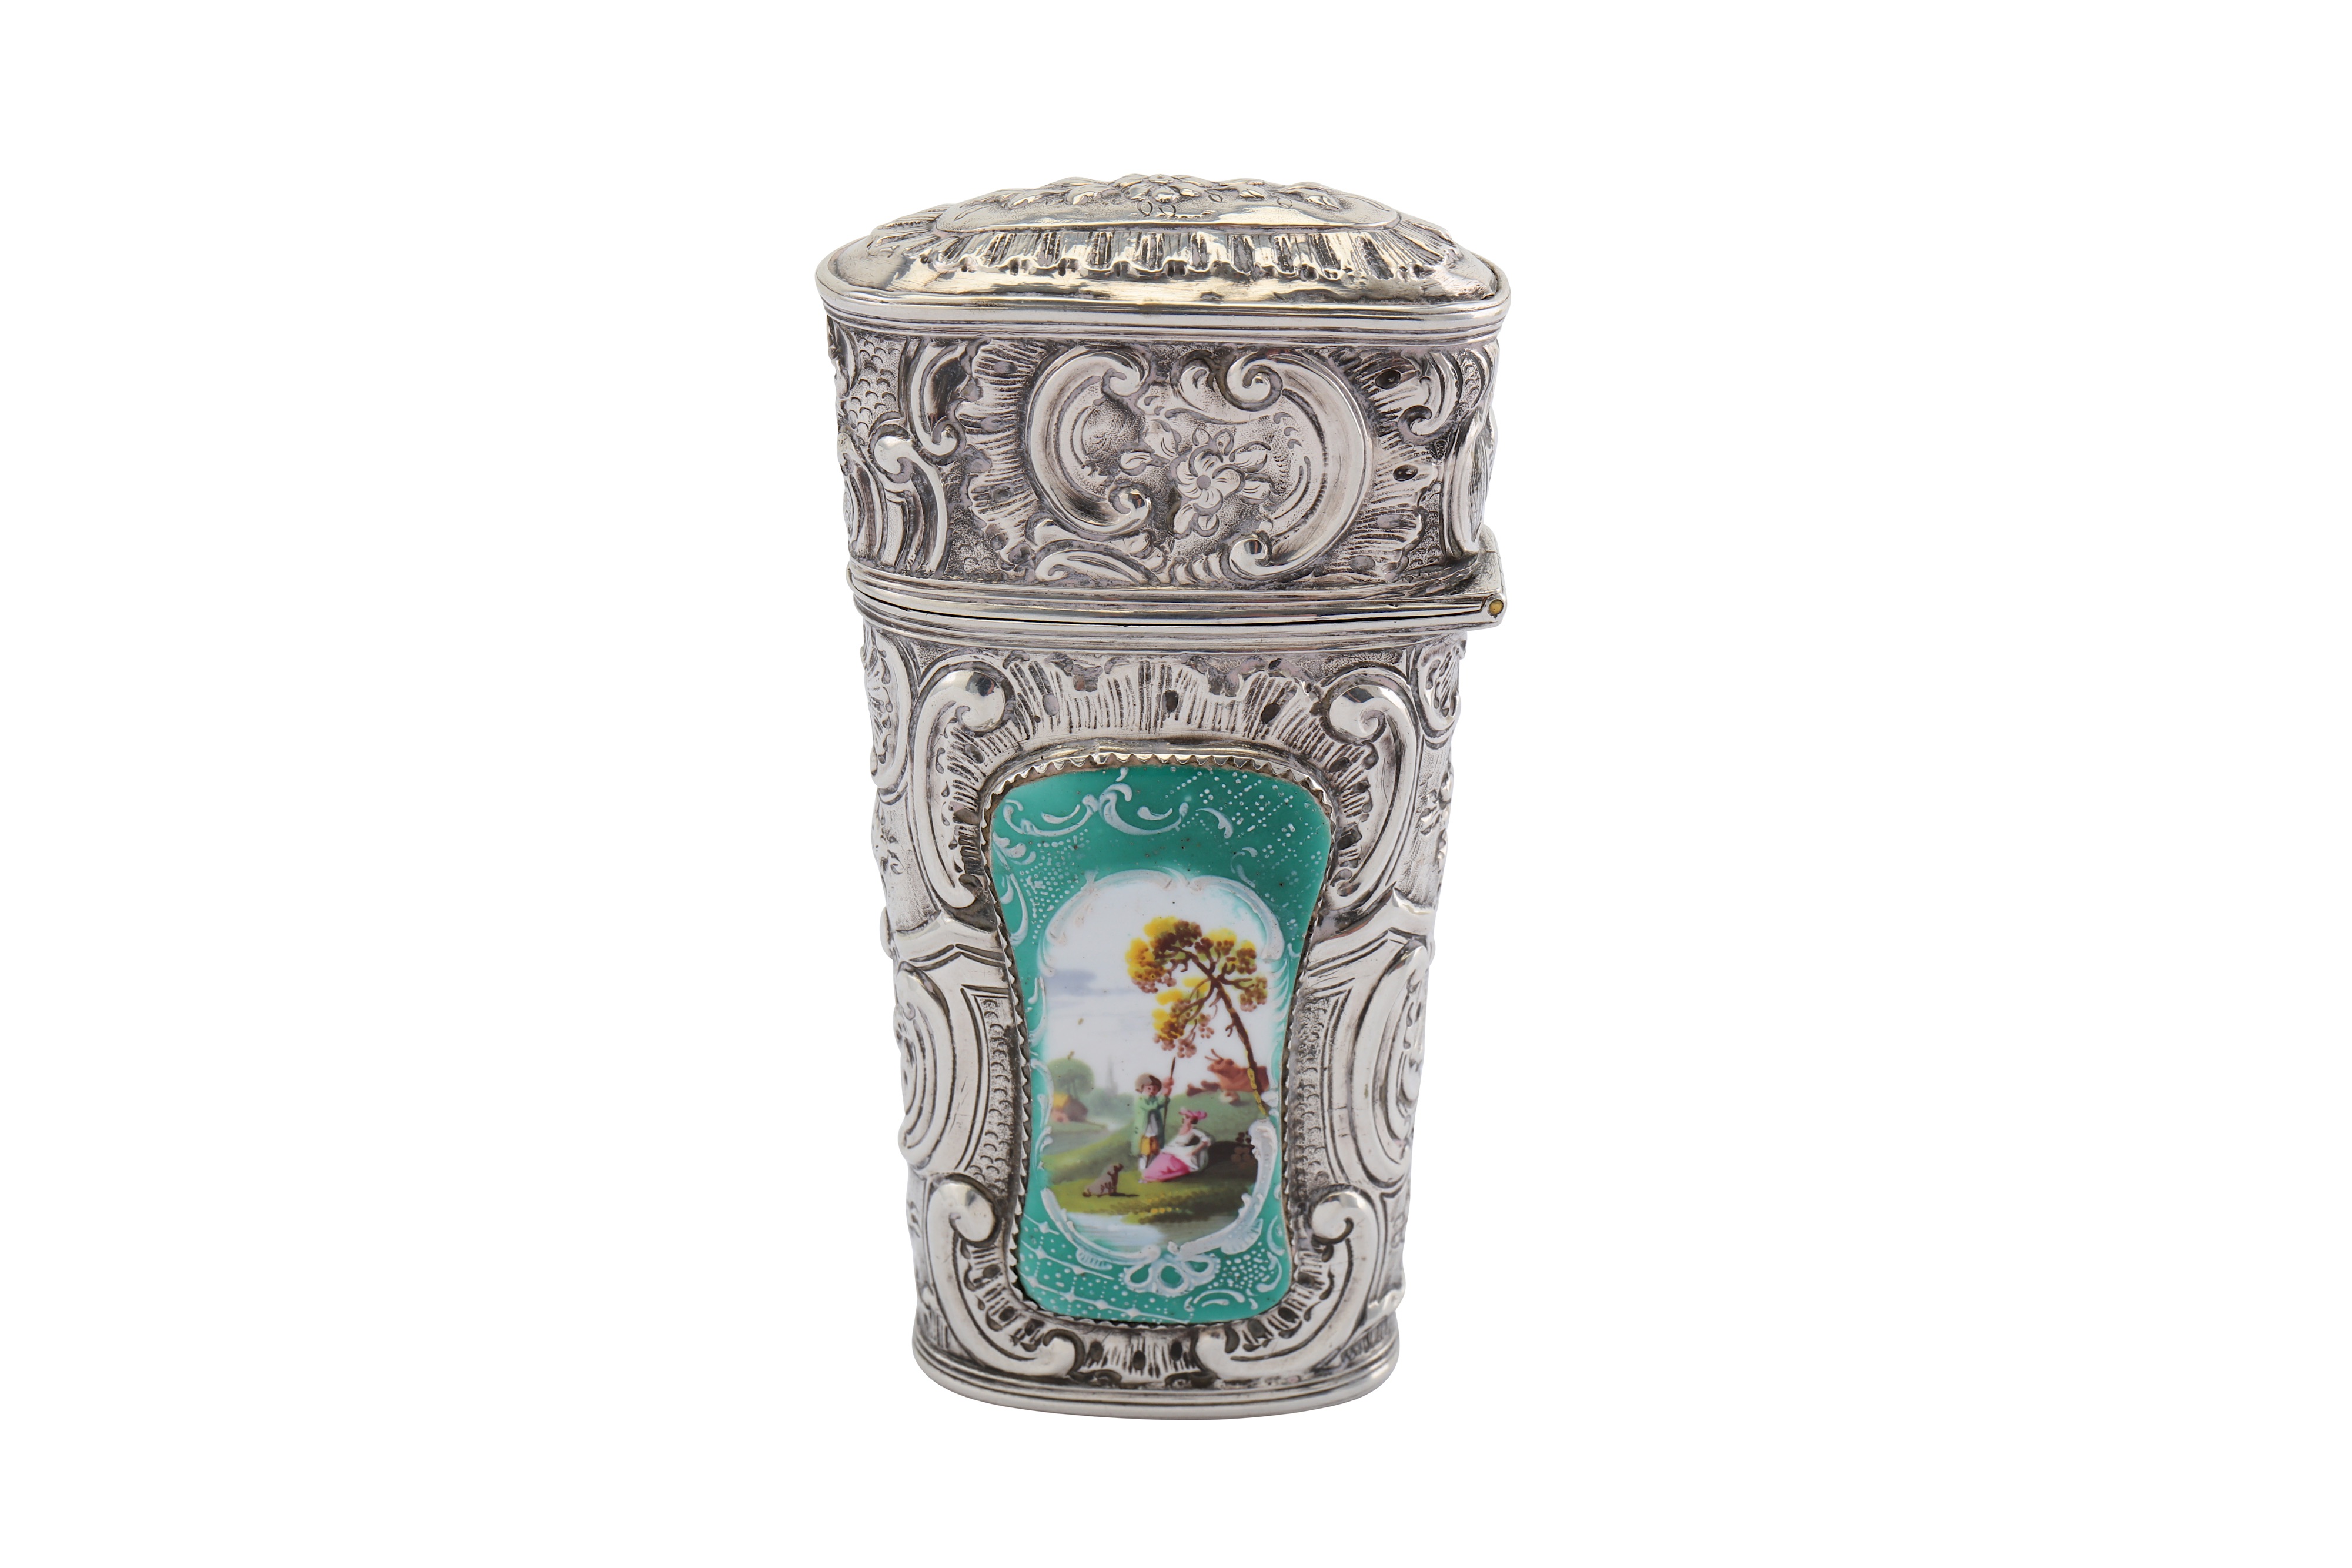 A mid-18th century English unmarked silver and enamel etui, circa 1760 - Image 3 of 5